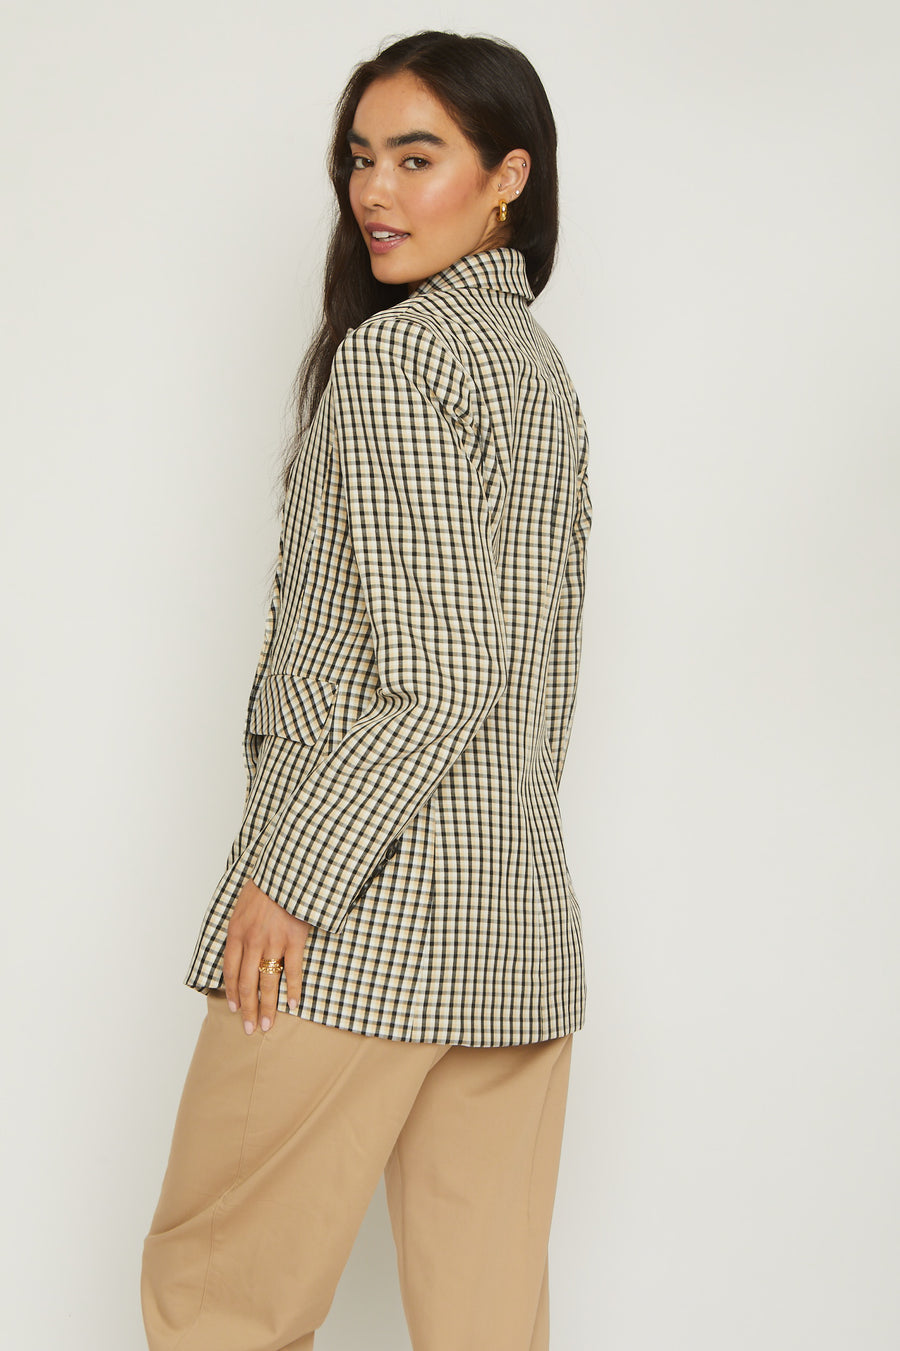 No Srcipt image - Images of 6 of 7 Classic Gingham Print Black White Blazer Jacket Oversized Fit Workwear Office Wear Professional Attire Classic Chic Staple Timeless Blazer